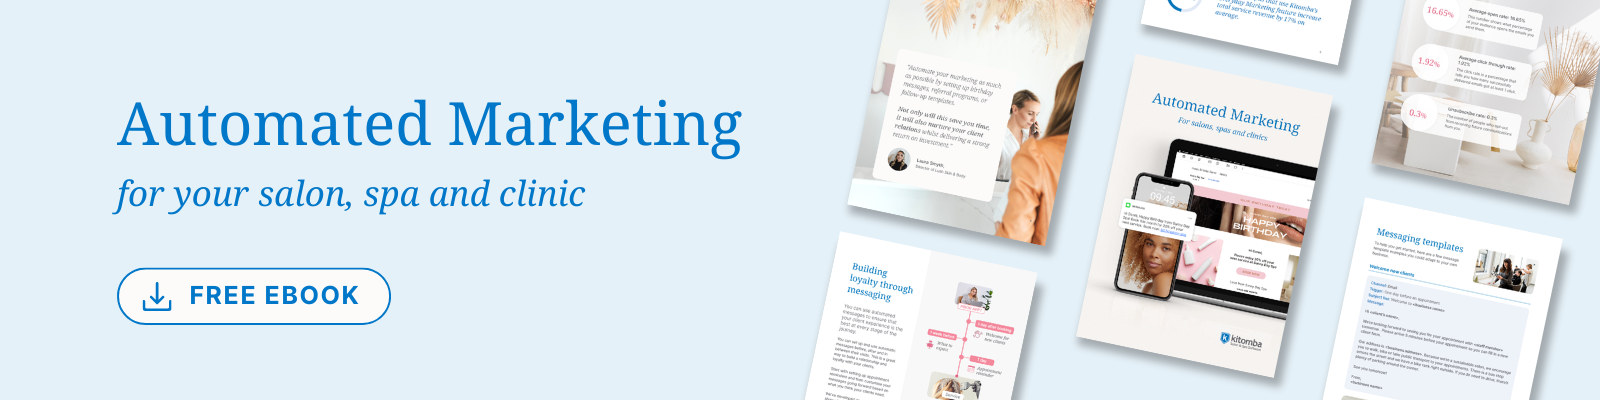 website landing page header-  automated marketing eBook  (1600 x 400 px)